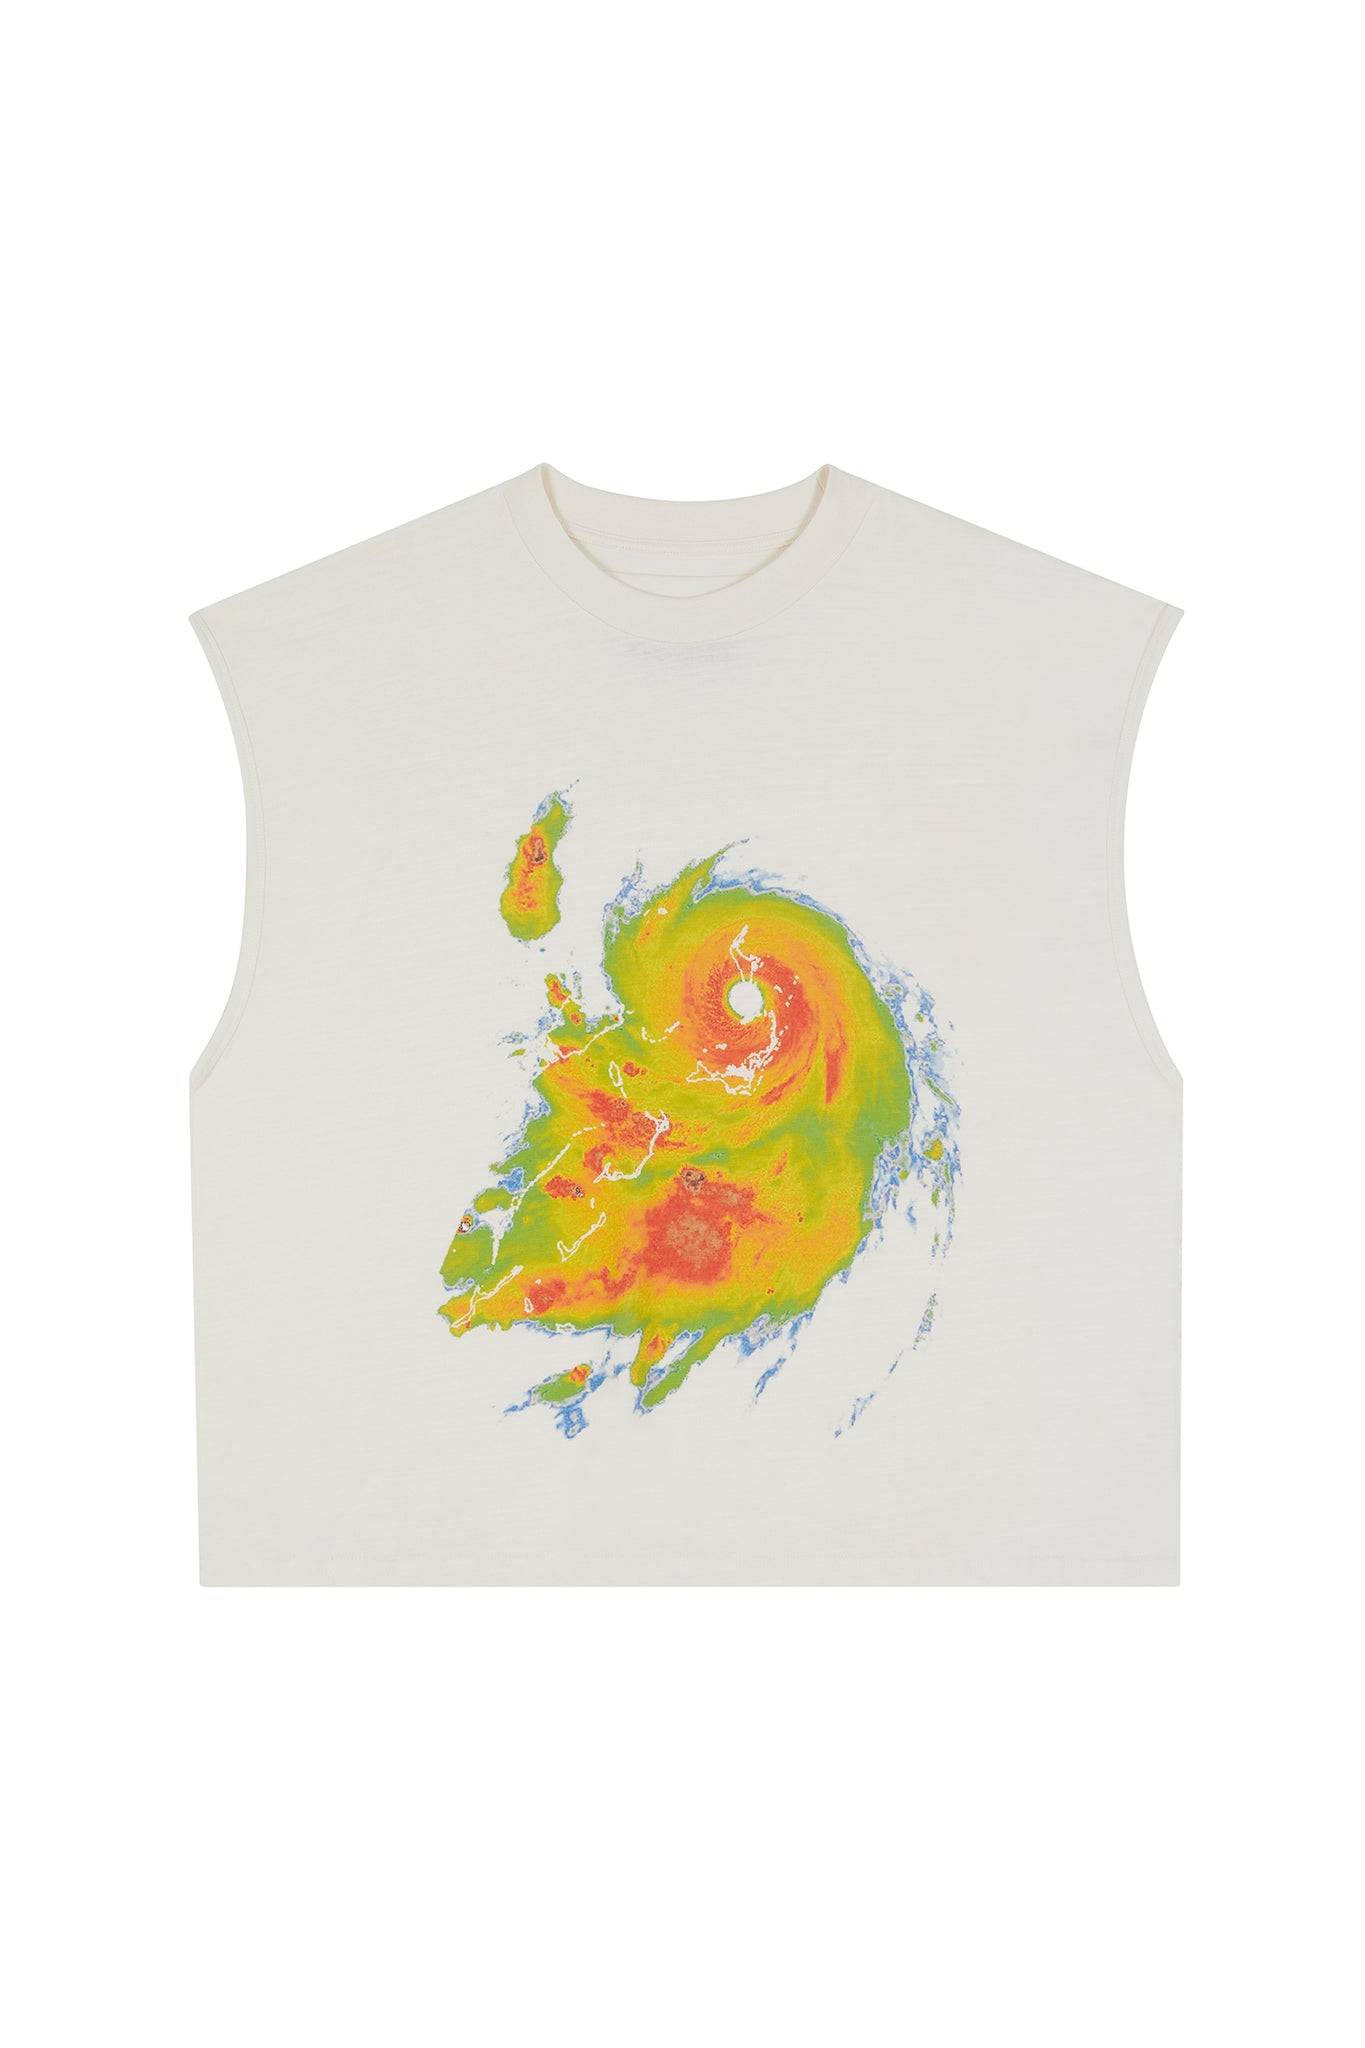 THE STORM MUSCLE TEE